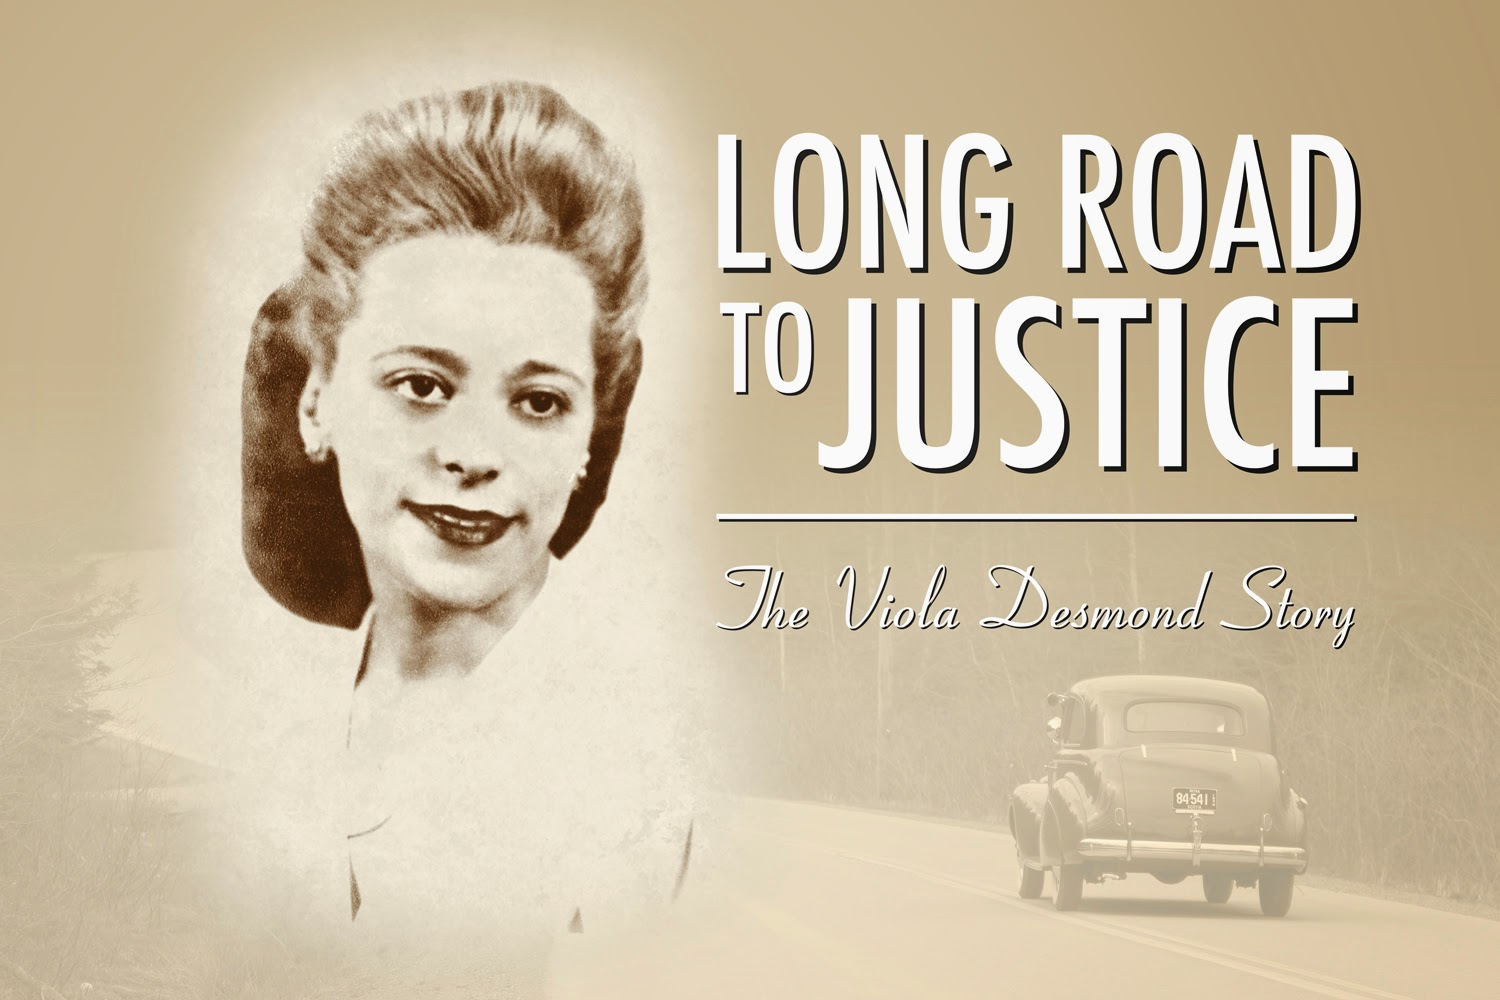 http://discover.halifaxpubliclibraries.ca/?q=title:long%20road%20to%20justice